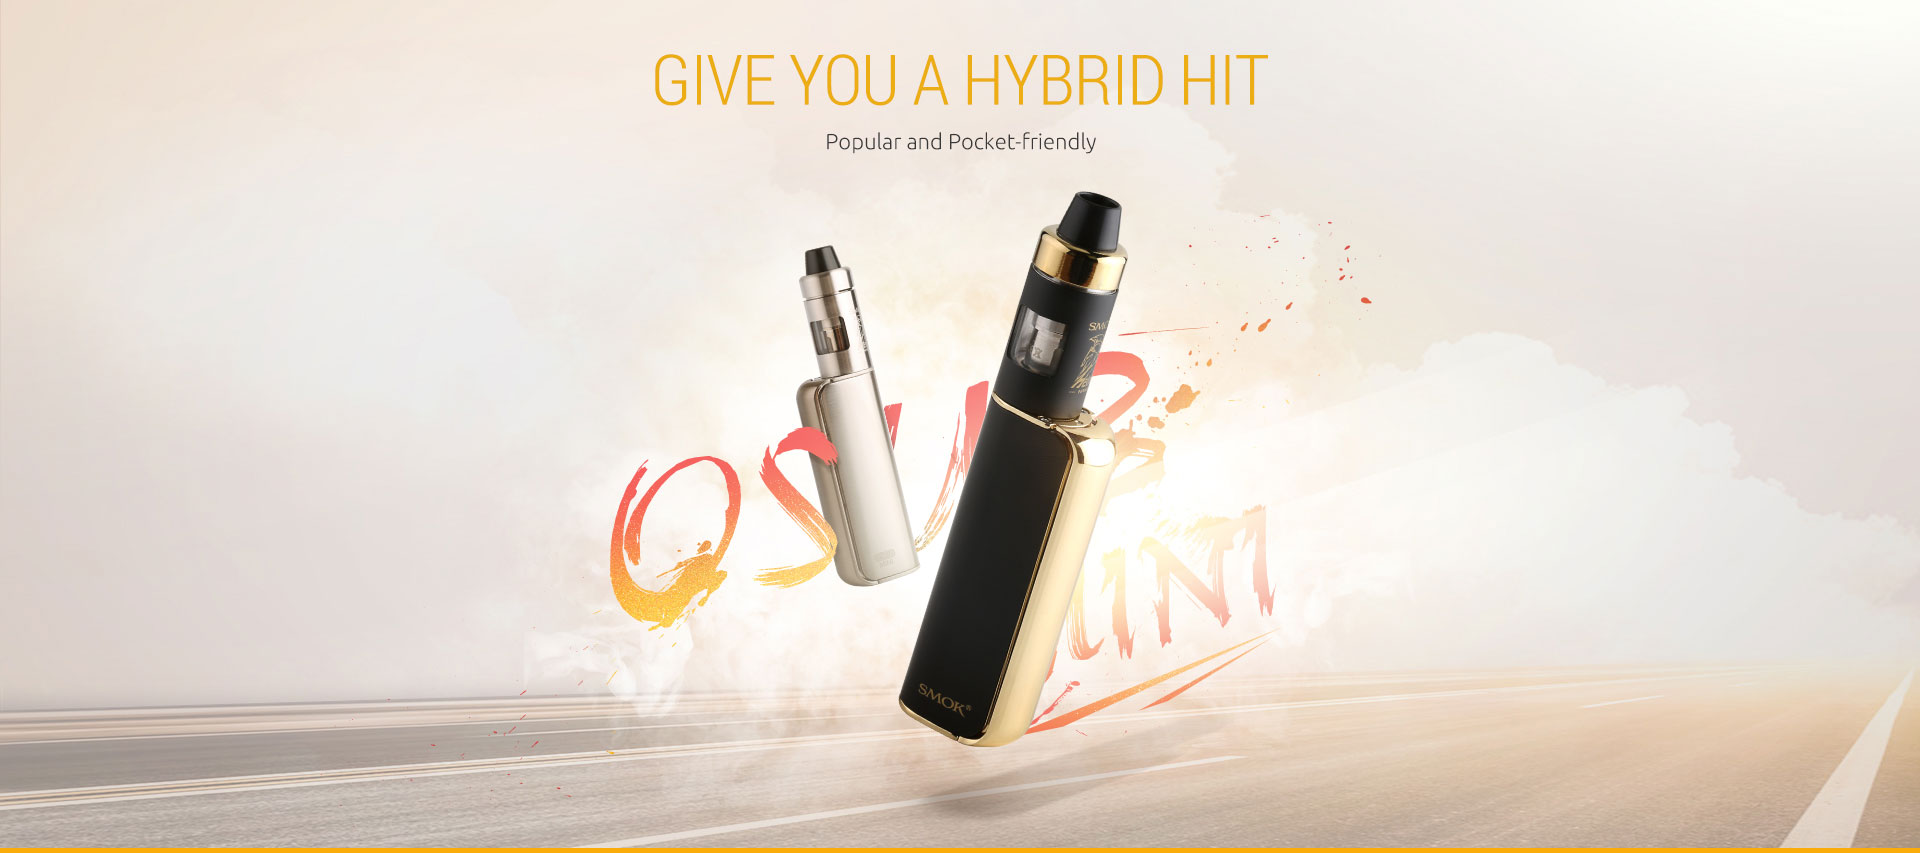 SMOK OSUB Mini 60W Kit&Coil&Tank Will Give You a Hybrid Hit & Popular and Pocket Friendly Feature